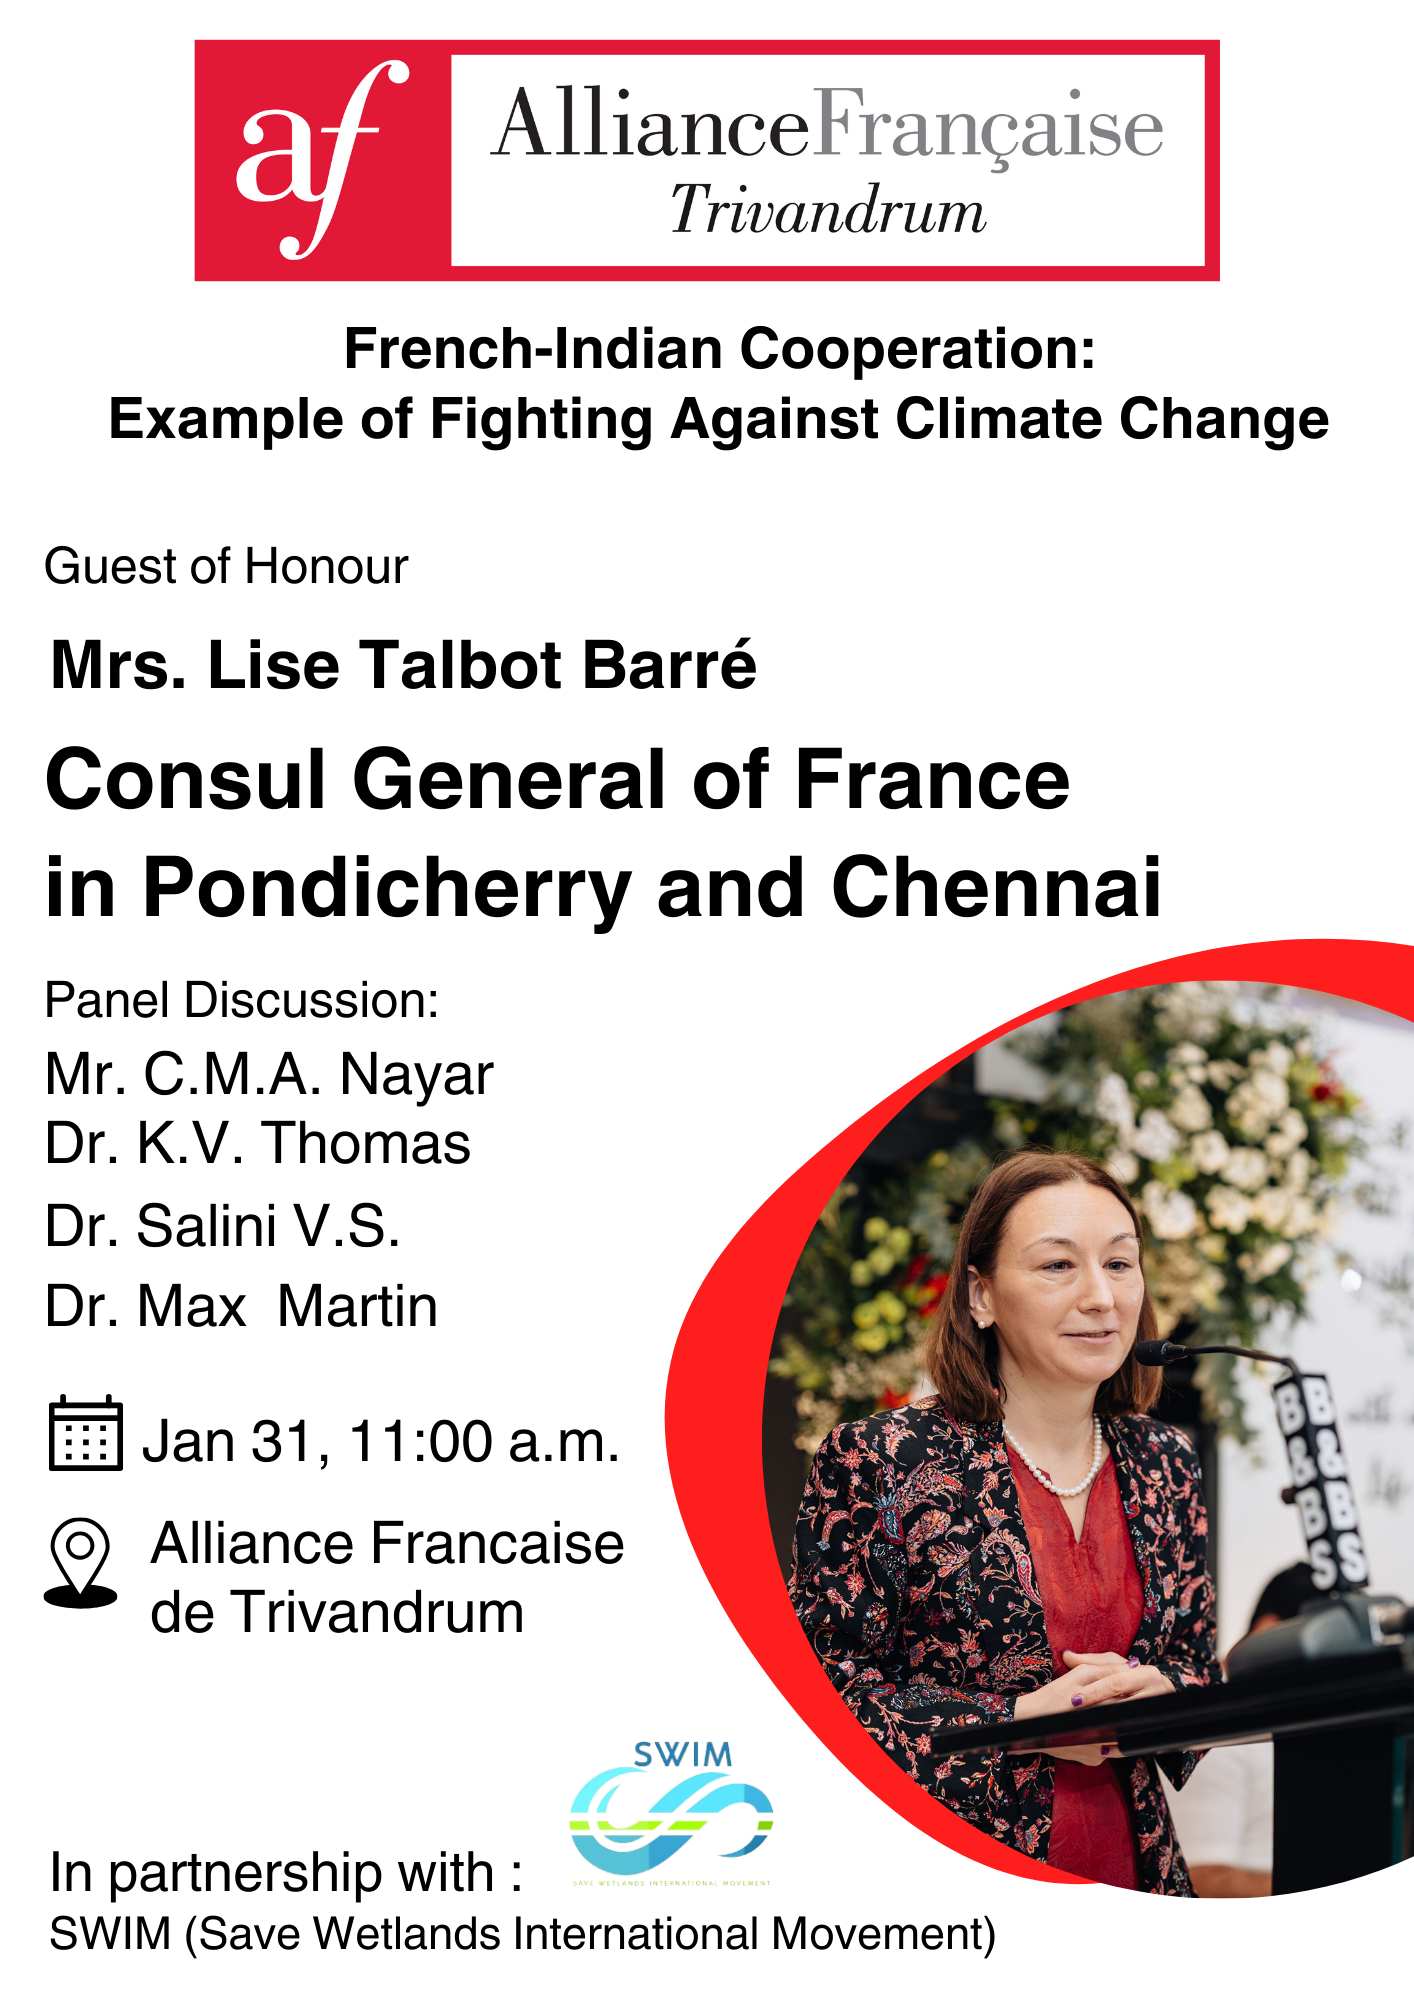 French-Indian cooperation: The example of fighting against climate change (Conference)